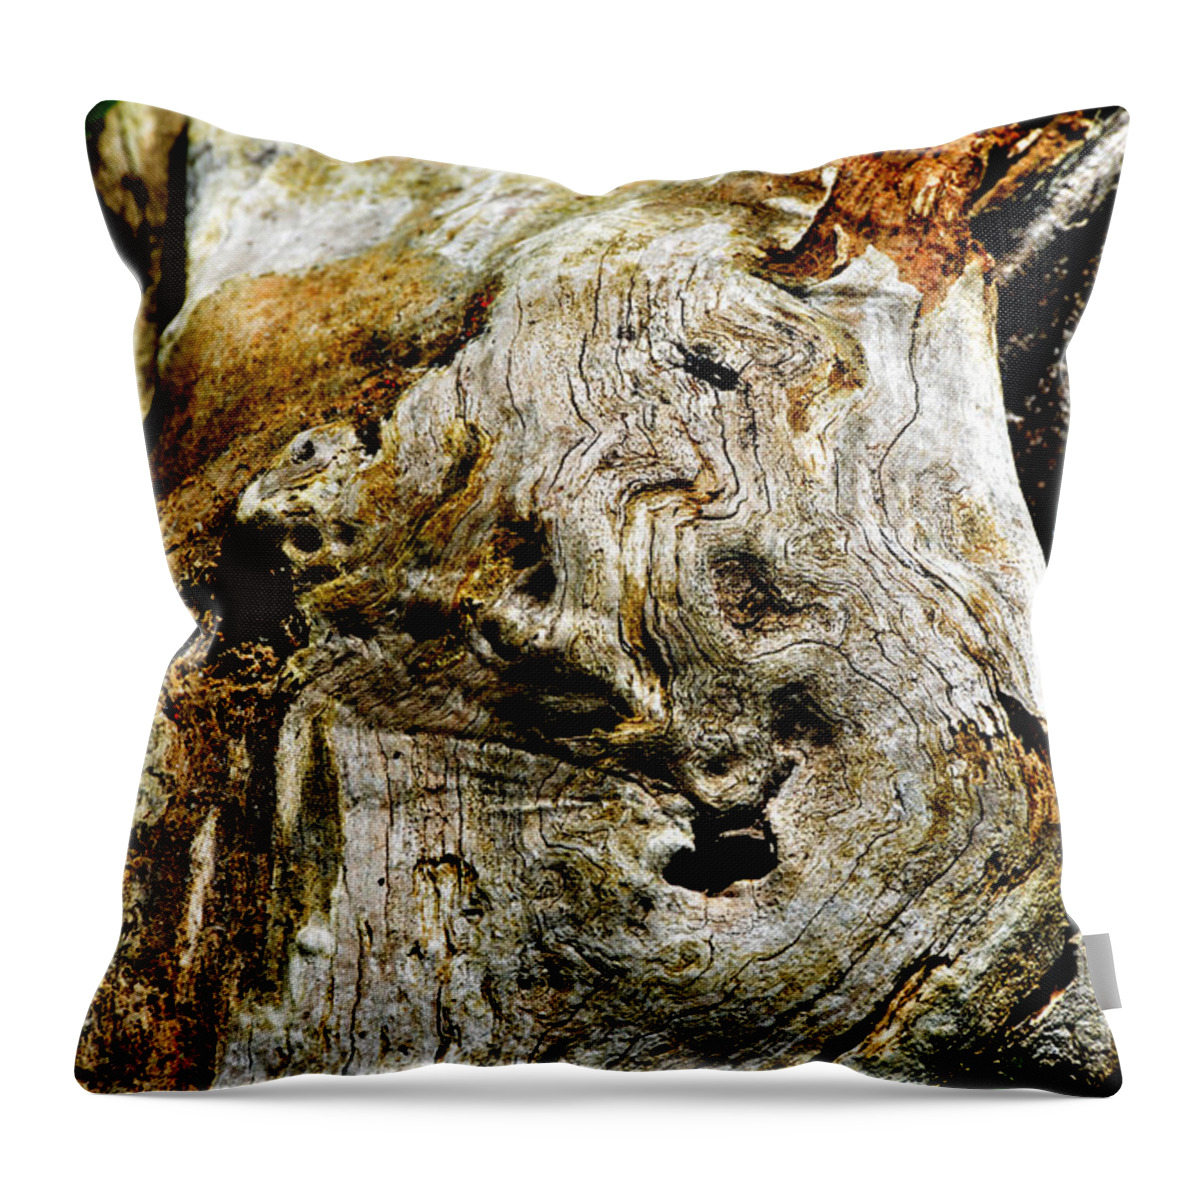 Nature Throw Pillow featuring the photograph Weathered Wood by Debbie Portwood